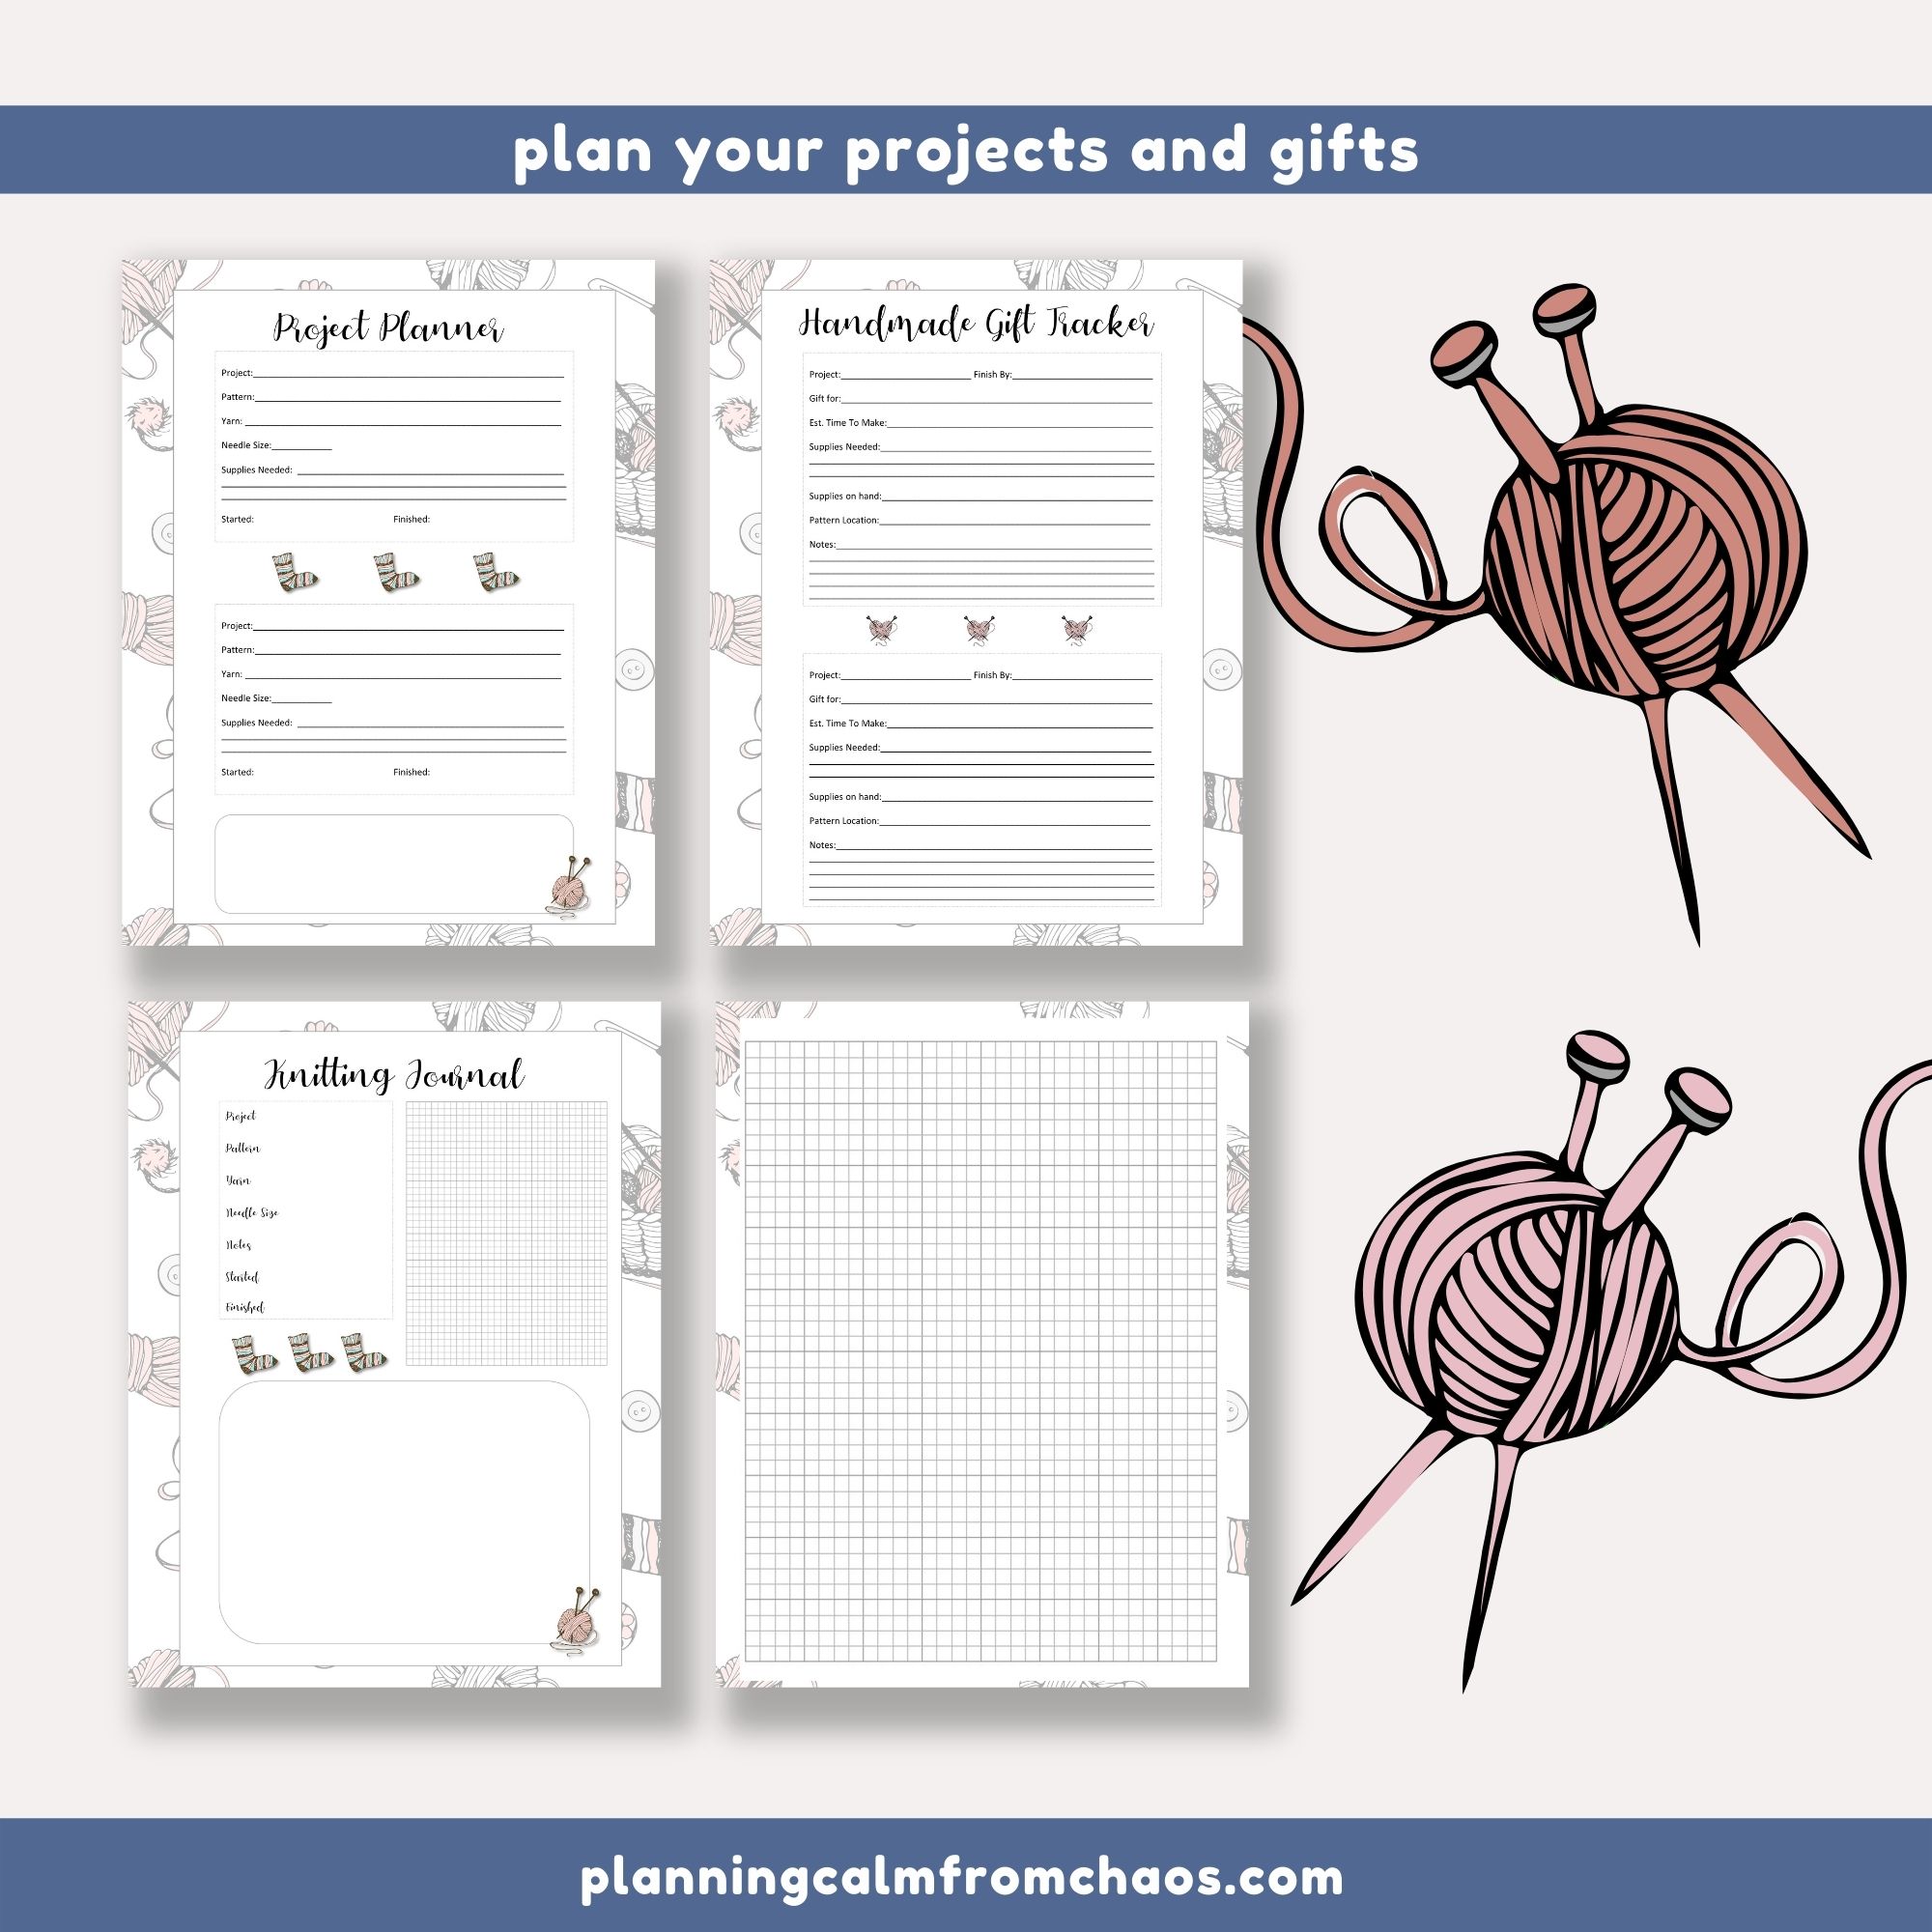 Knitting Project Planner knitting Planner / Knitting Journal A Place to  Keep Your Knitting Pattern Detailsspiral Bound &shipped to You 